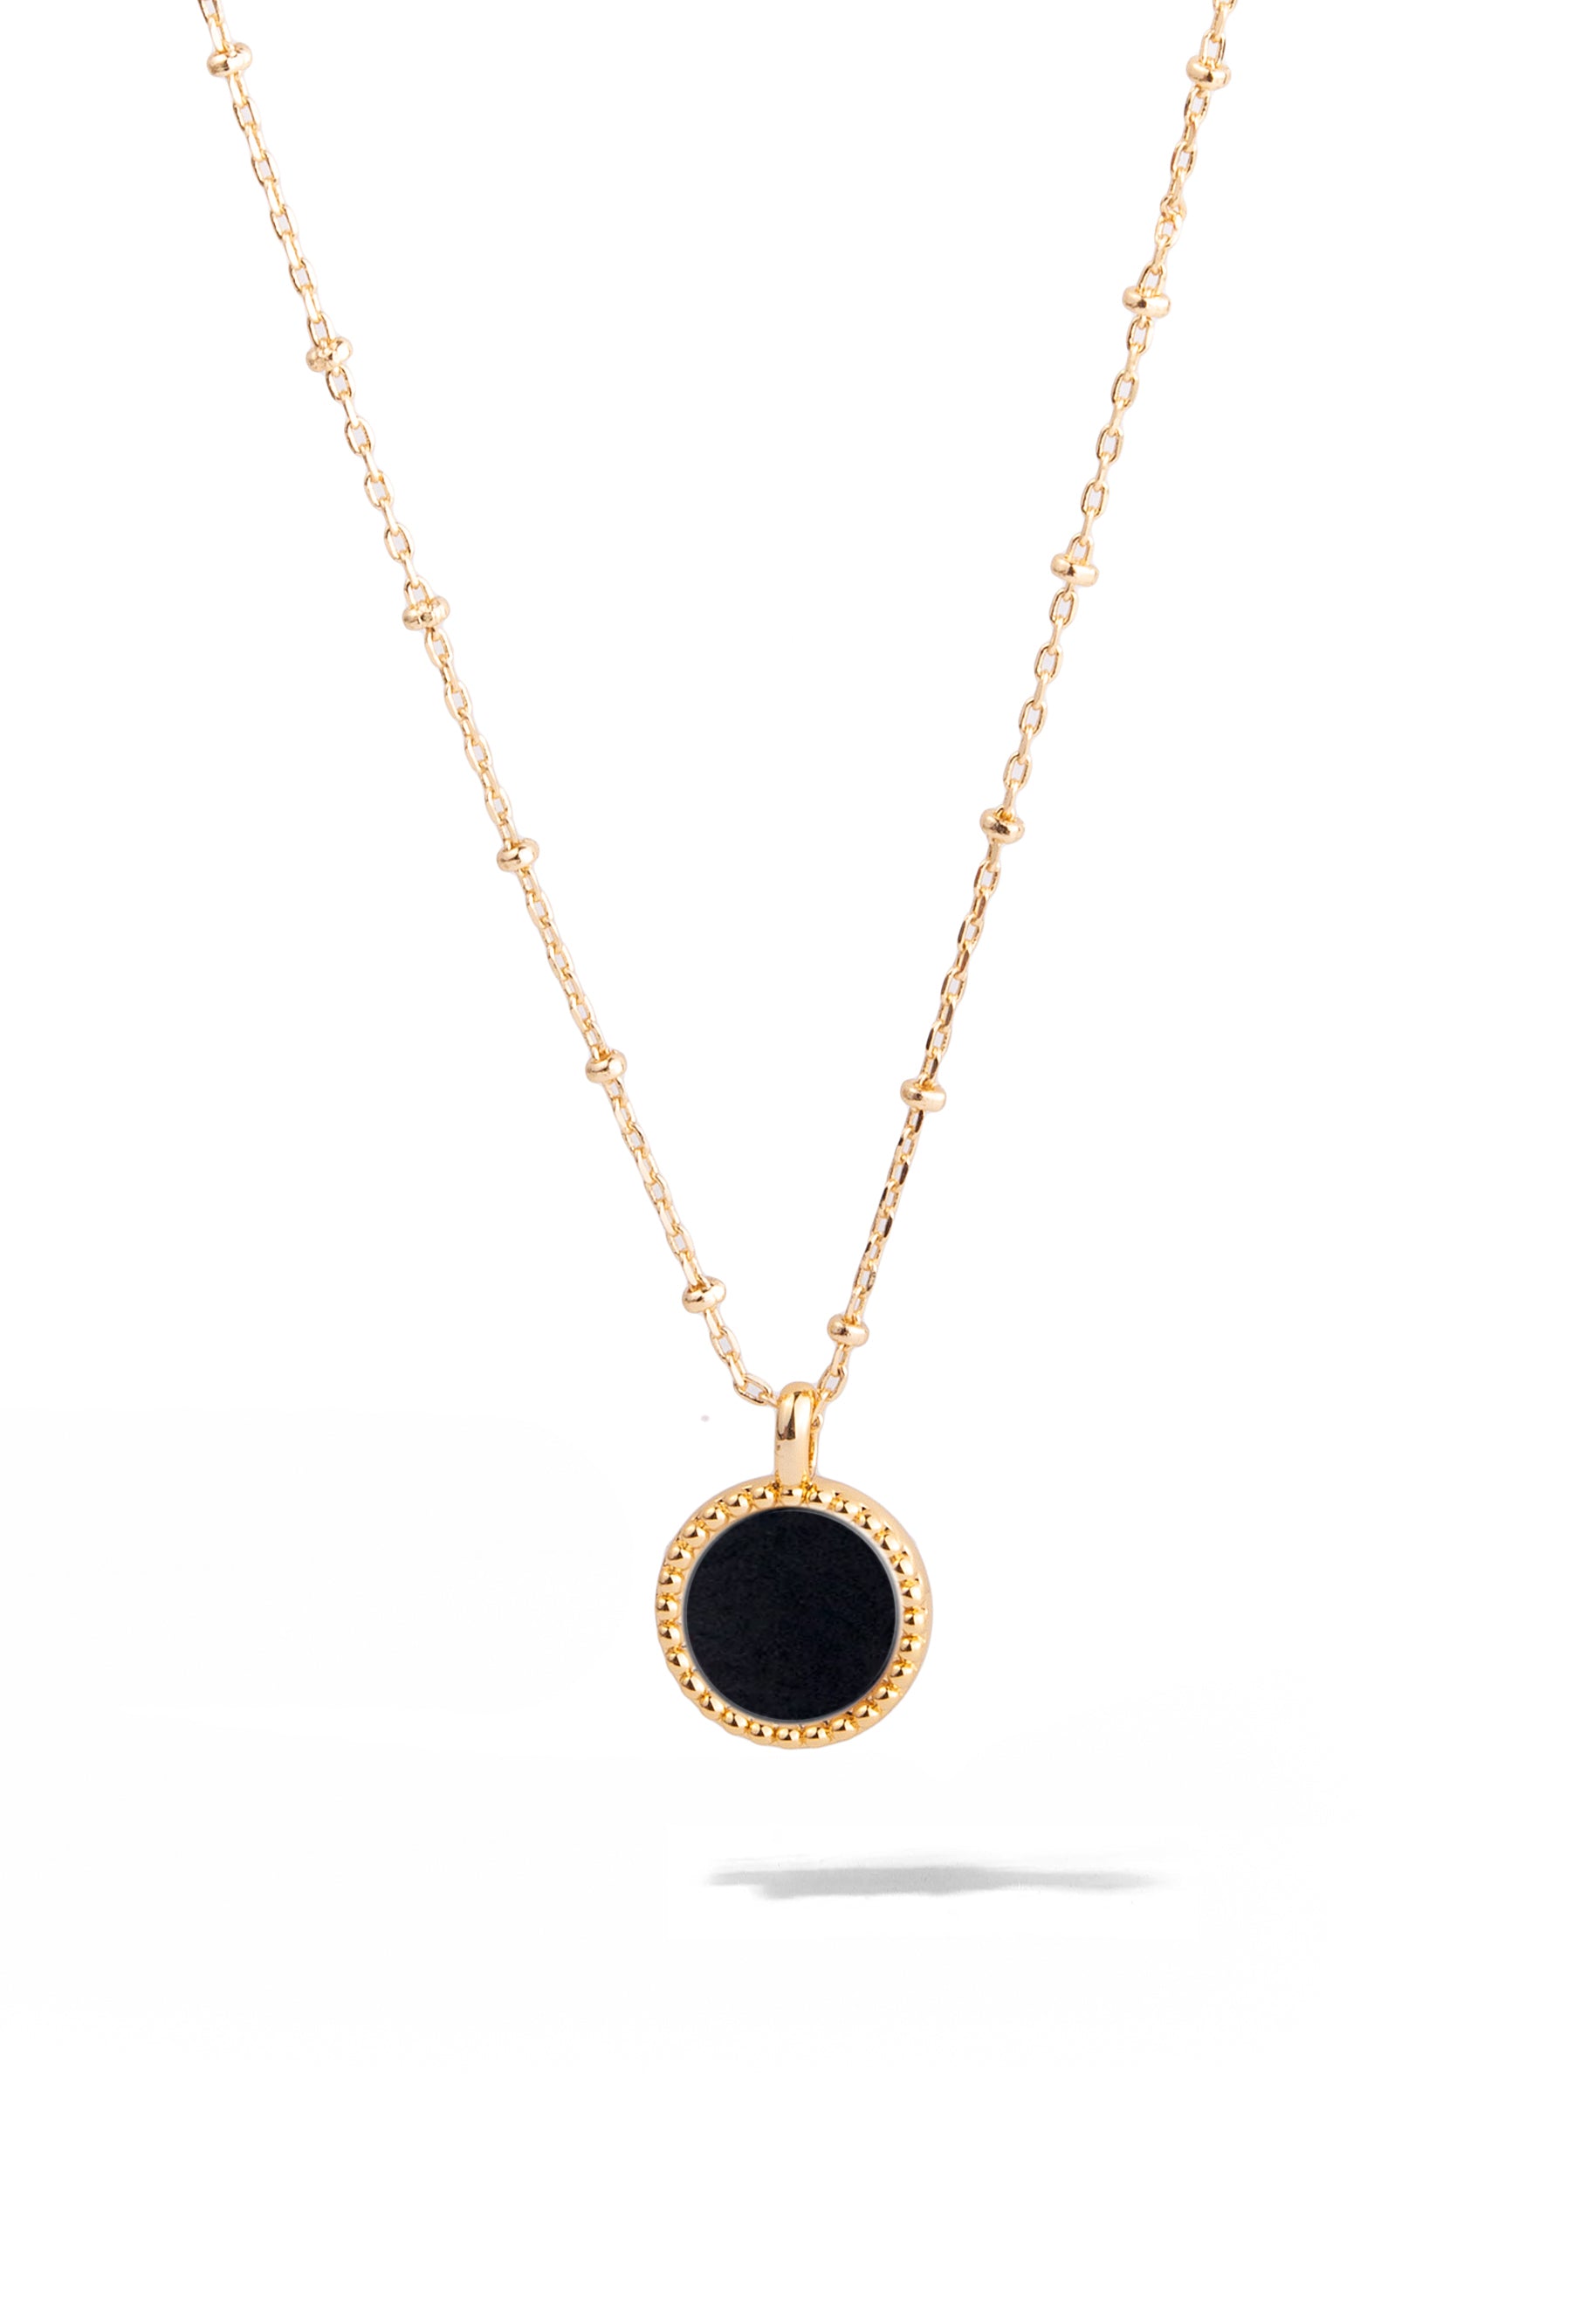 Black Onyx Necklace | Protection